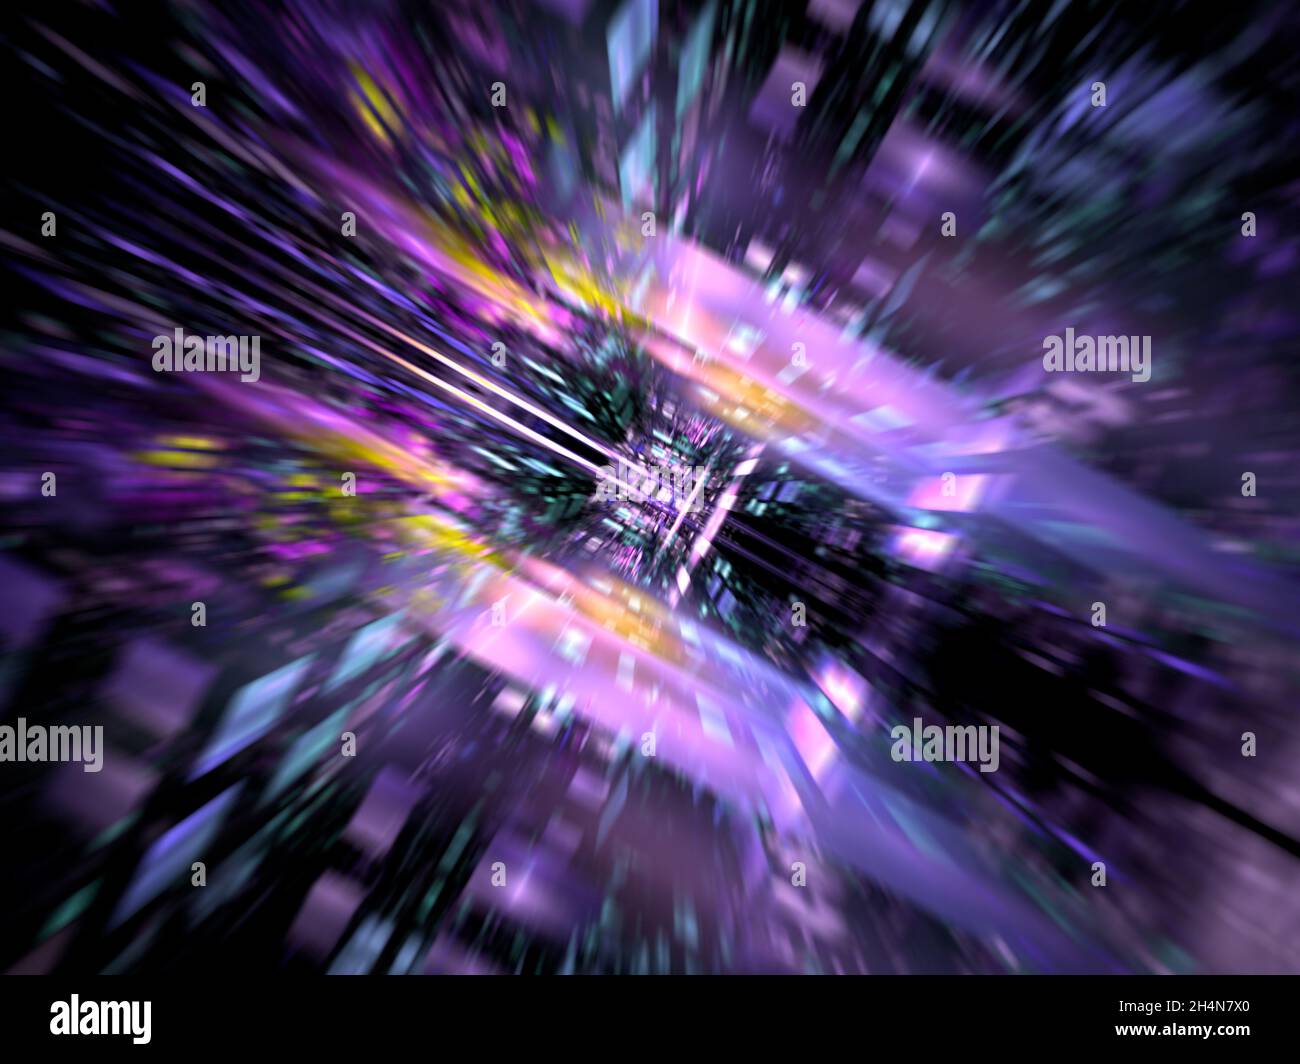 Motion blur and perspective effect - abstract 3d illustration Stock Photo